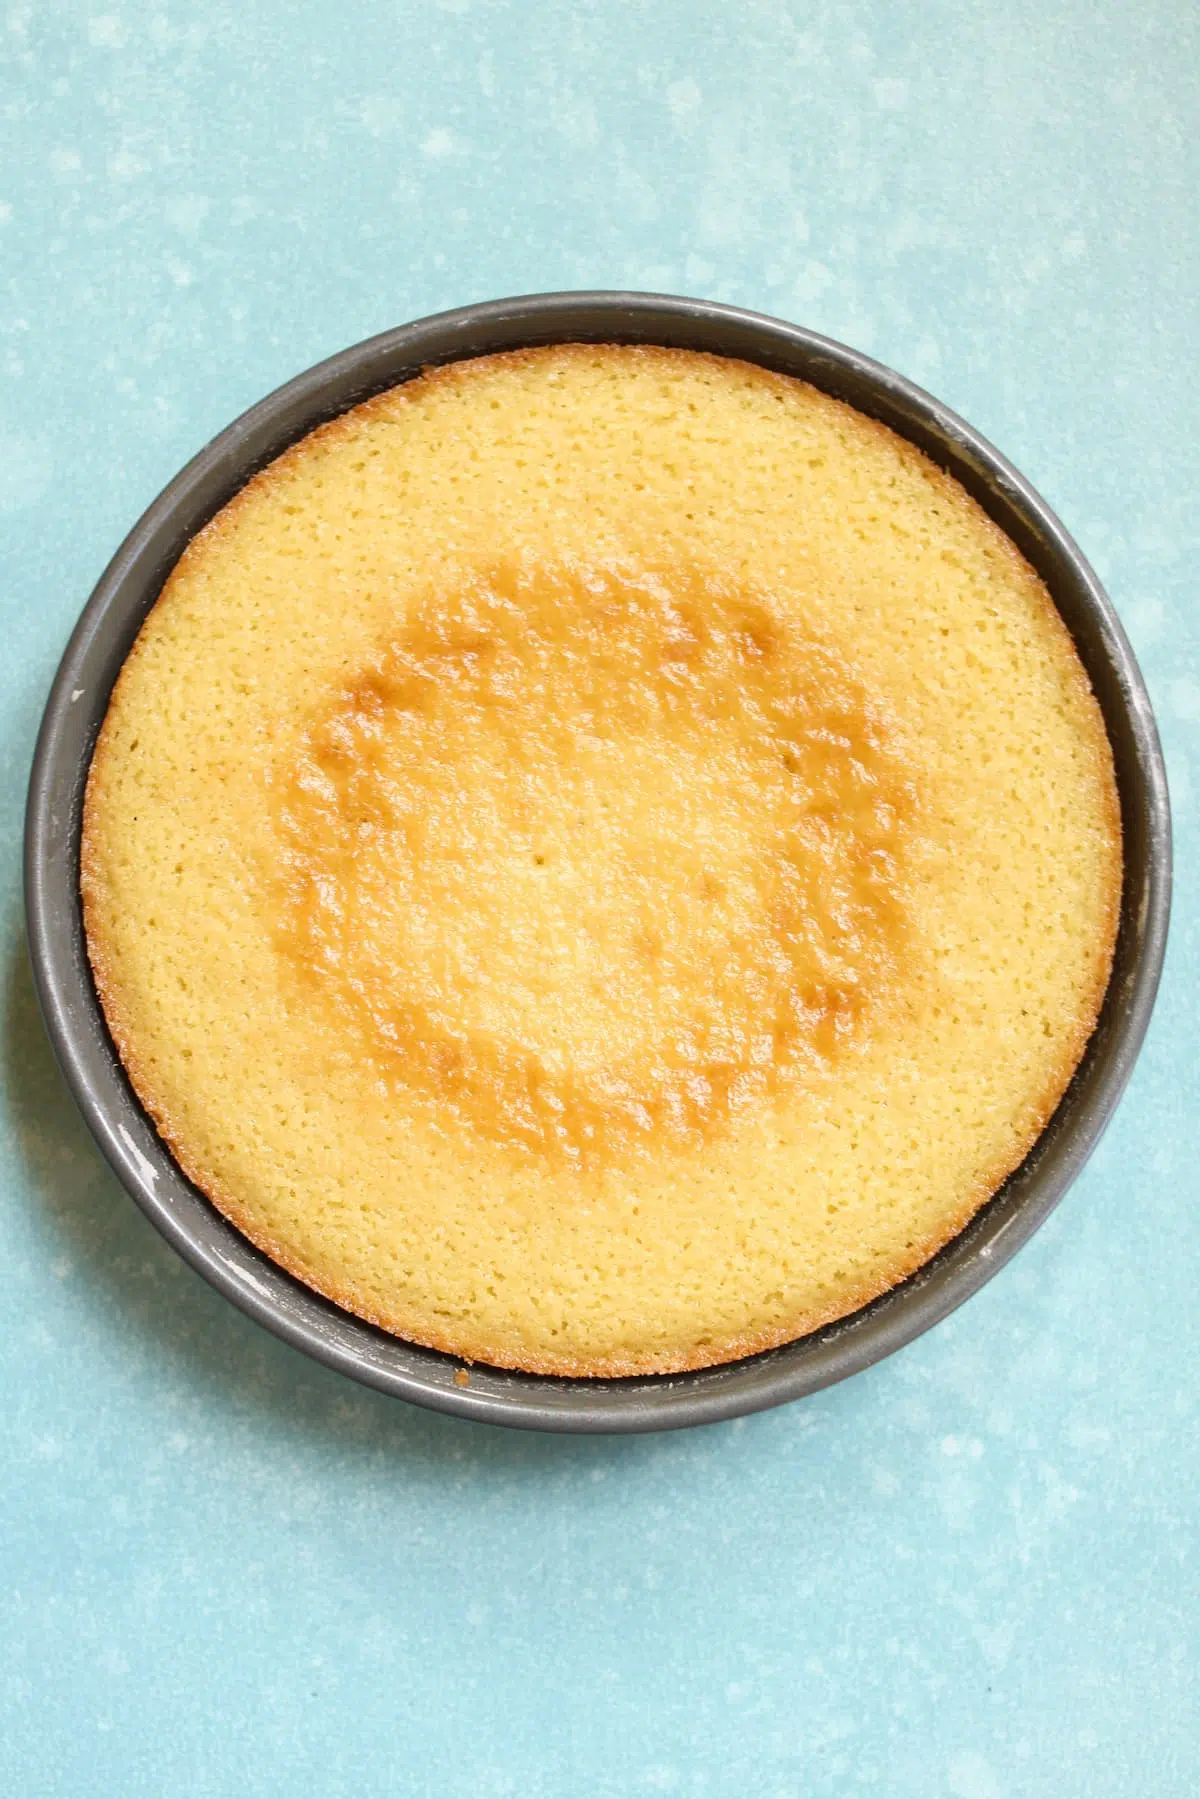 a cooked cake in a pan on a blue table.